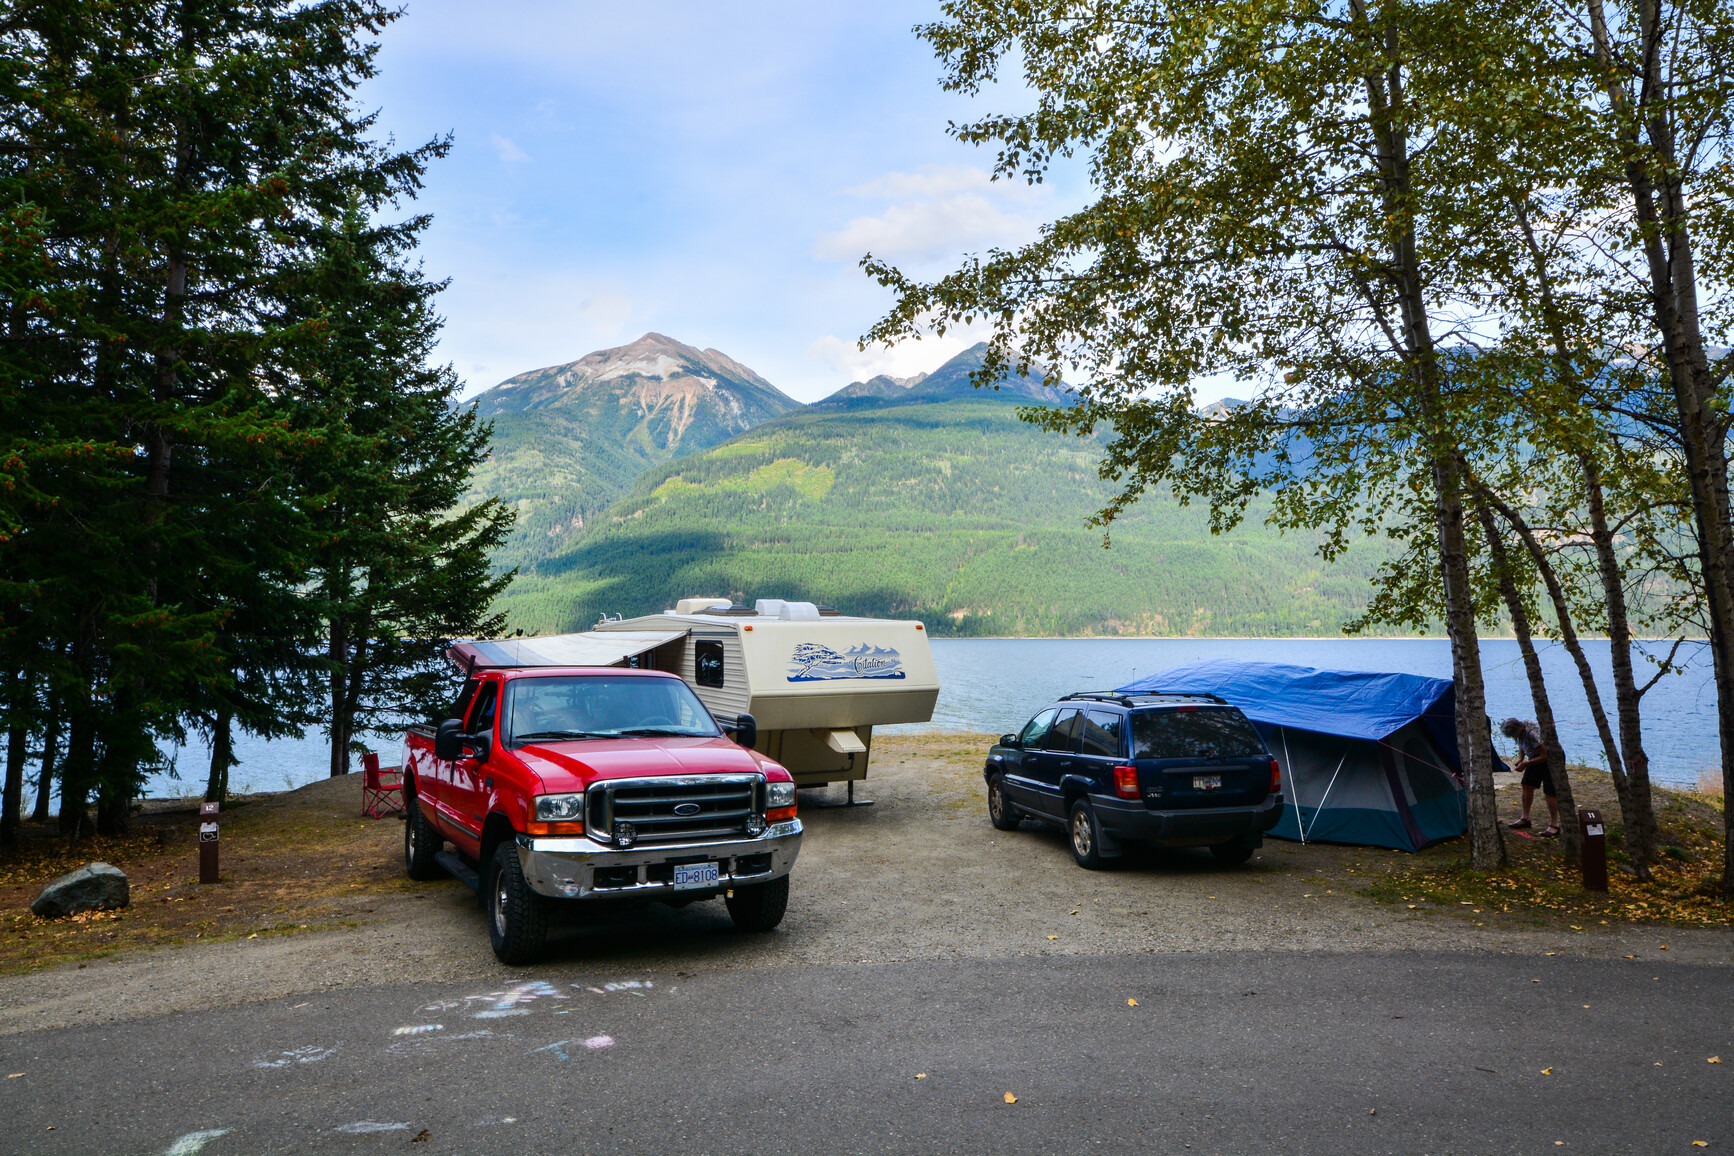 A lakeside campsite with a truck, trailer and a tent. A camper is setting up a tent. There is a view of the mountains across the lake.